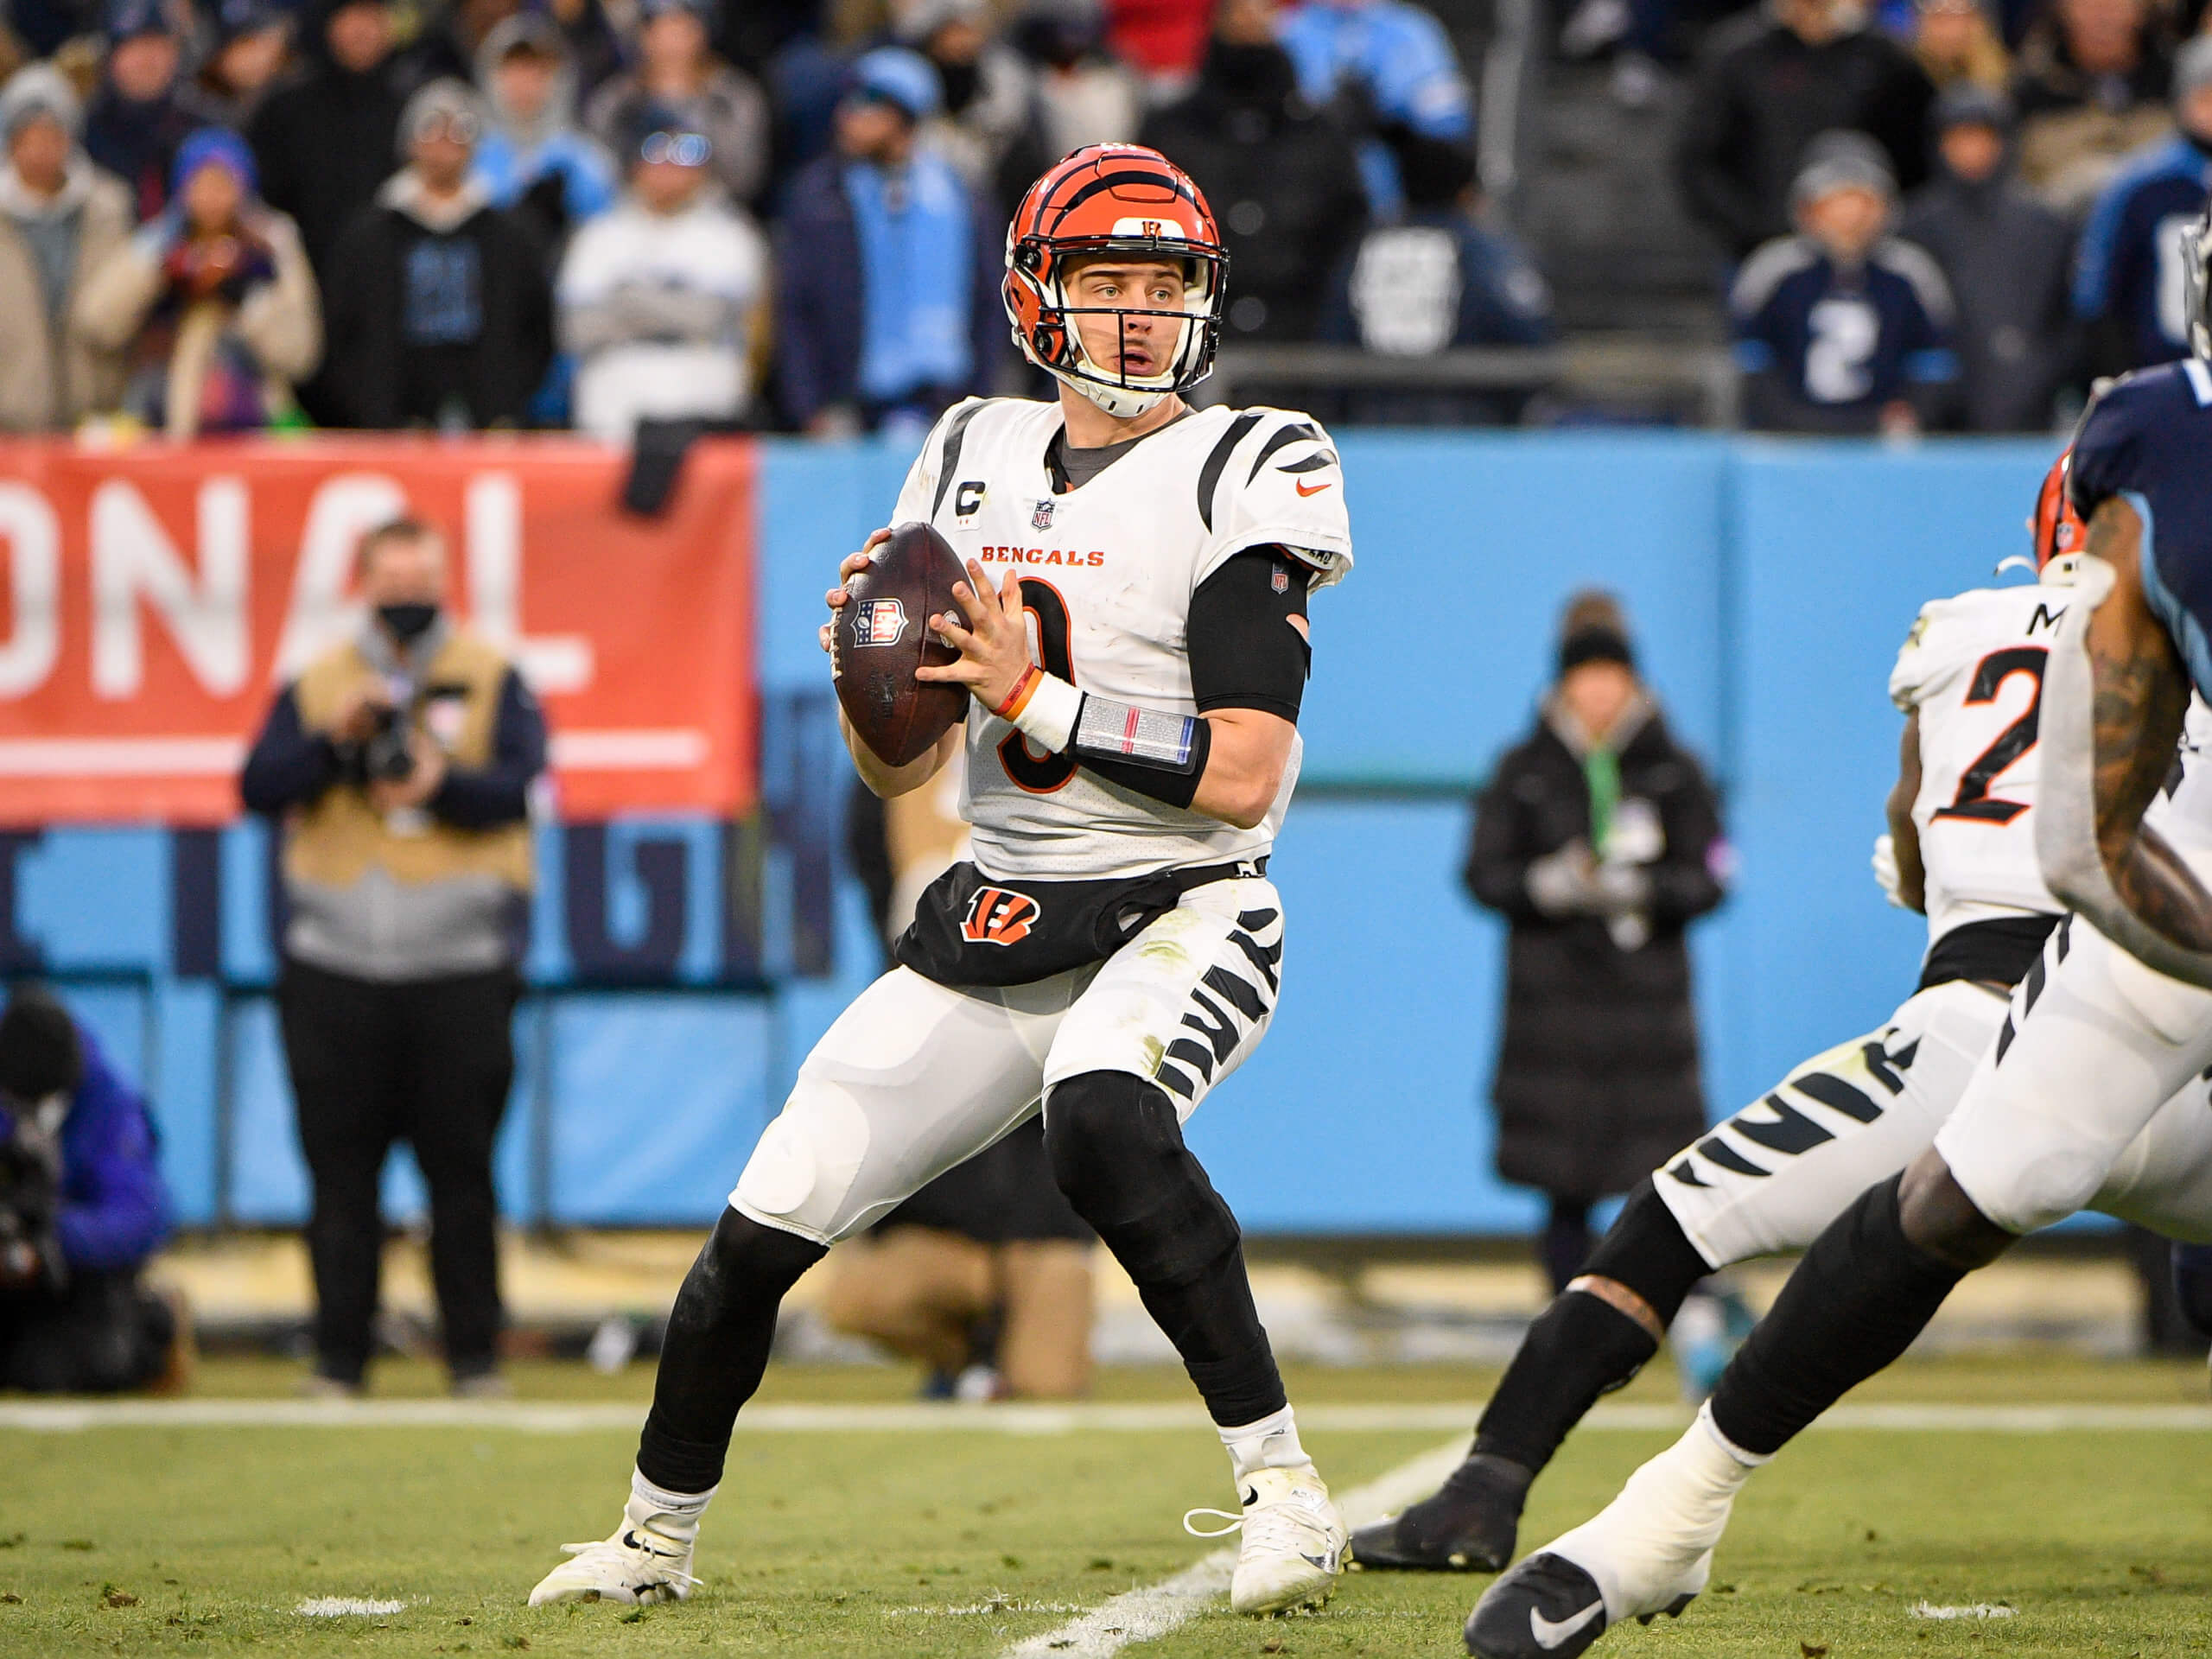 Bengals vs. Chiefs: 2022 AFC Championship Game preview, odds